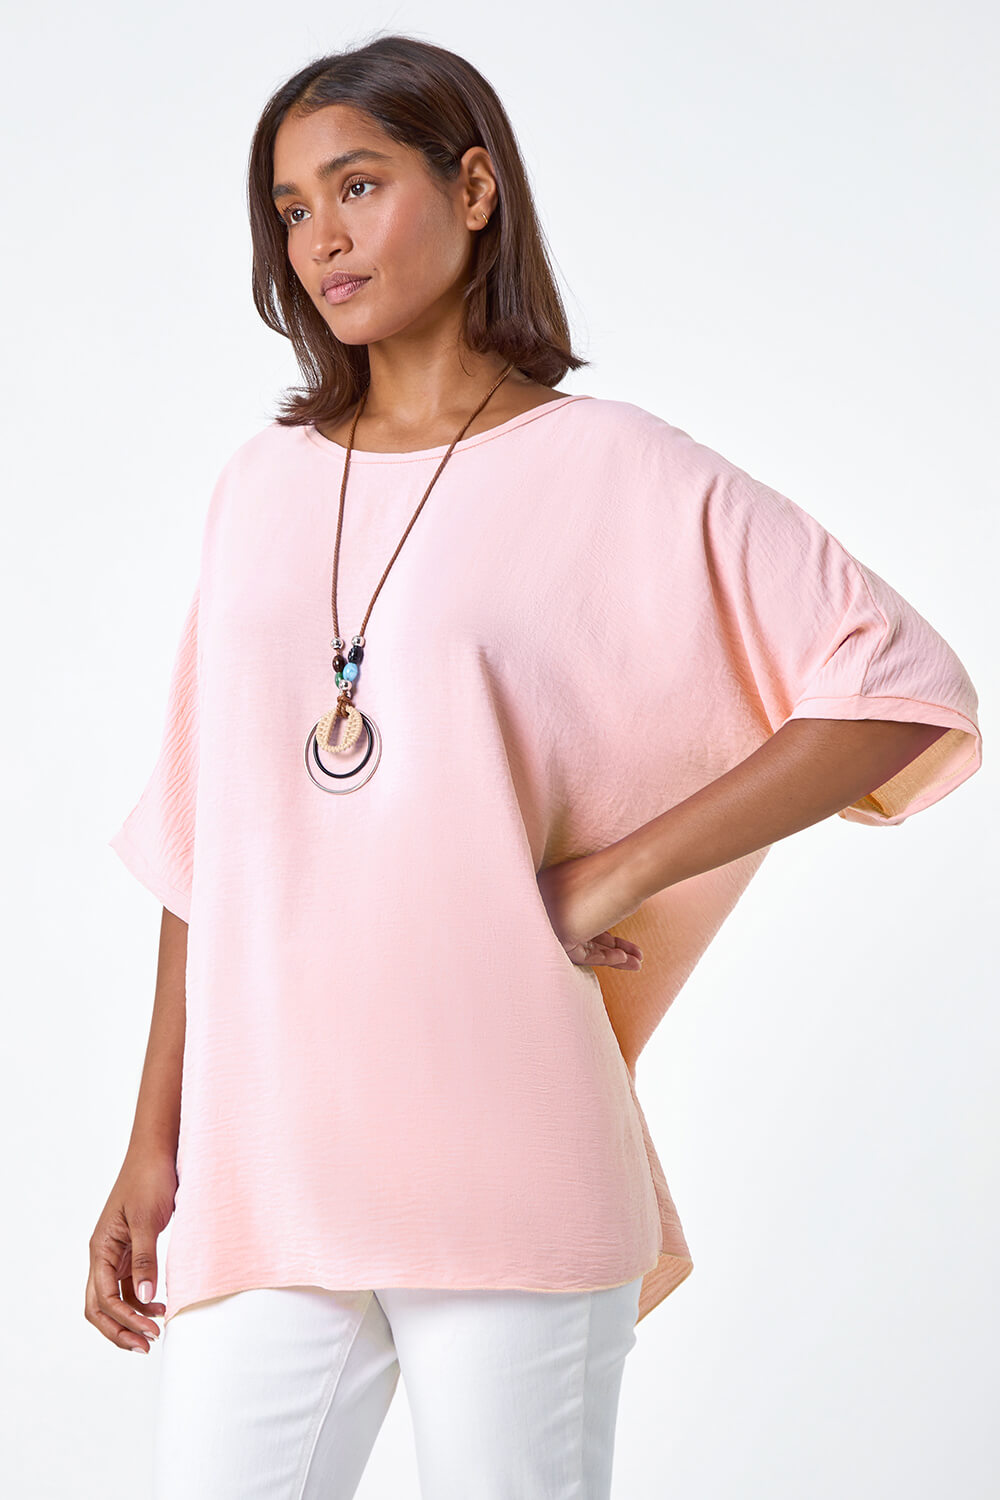 PINK Plain Tunic Top with Necklace, Image 4 of 5